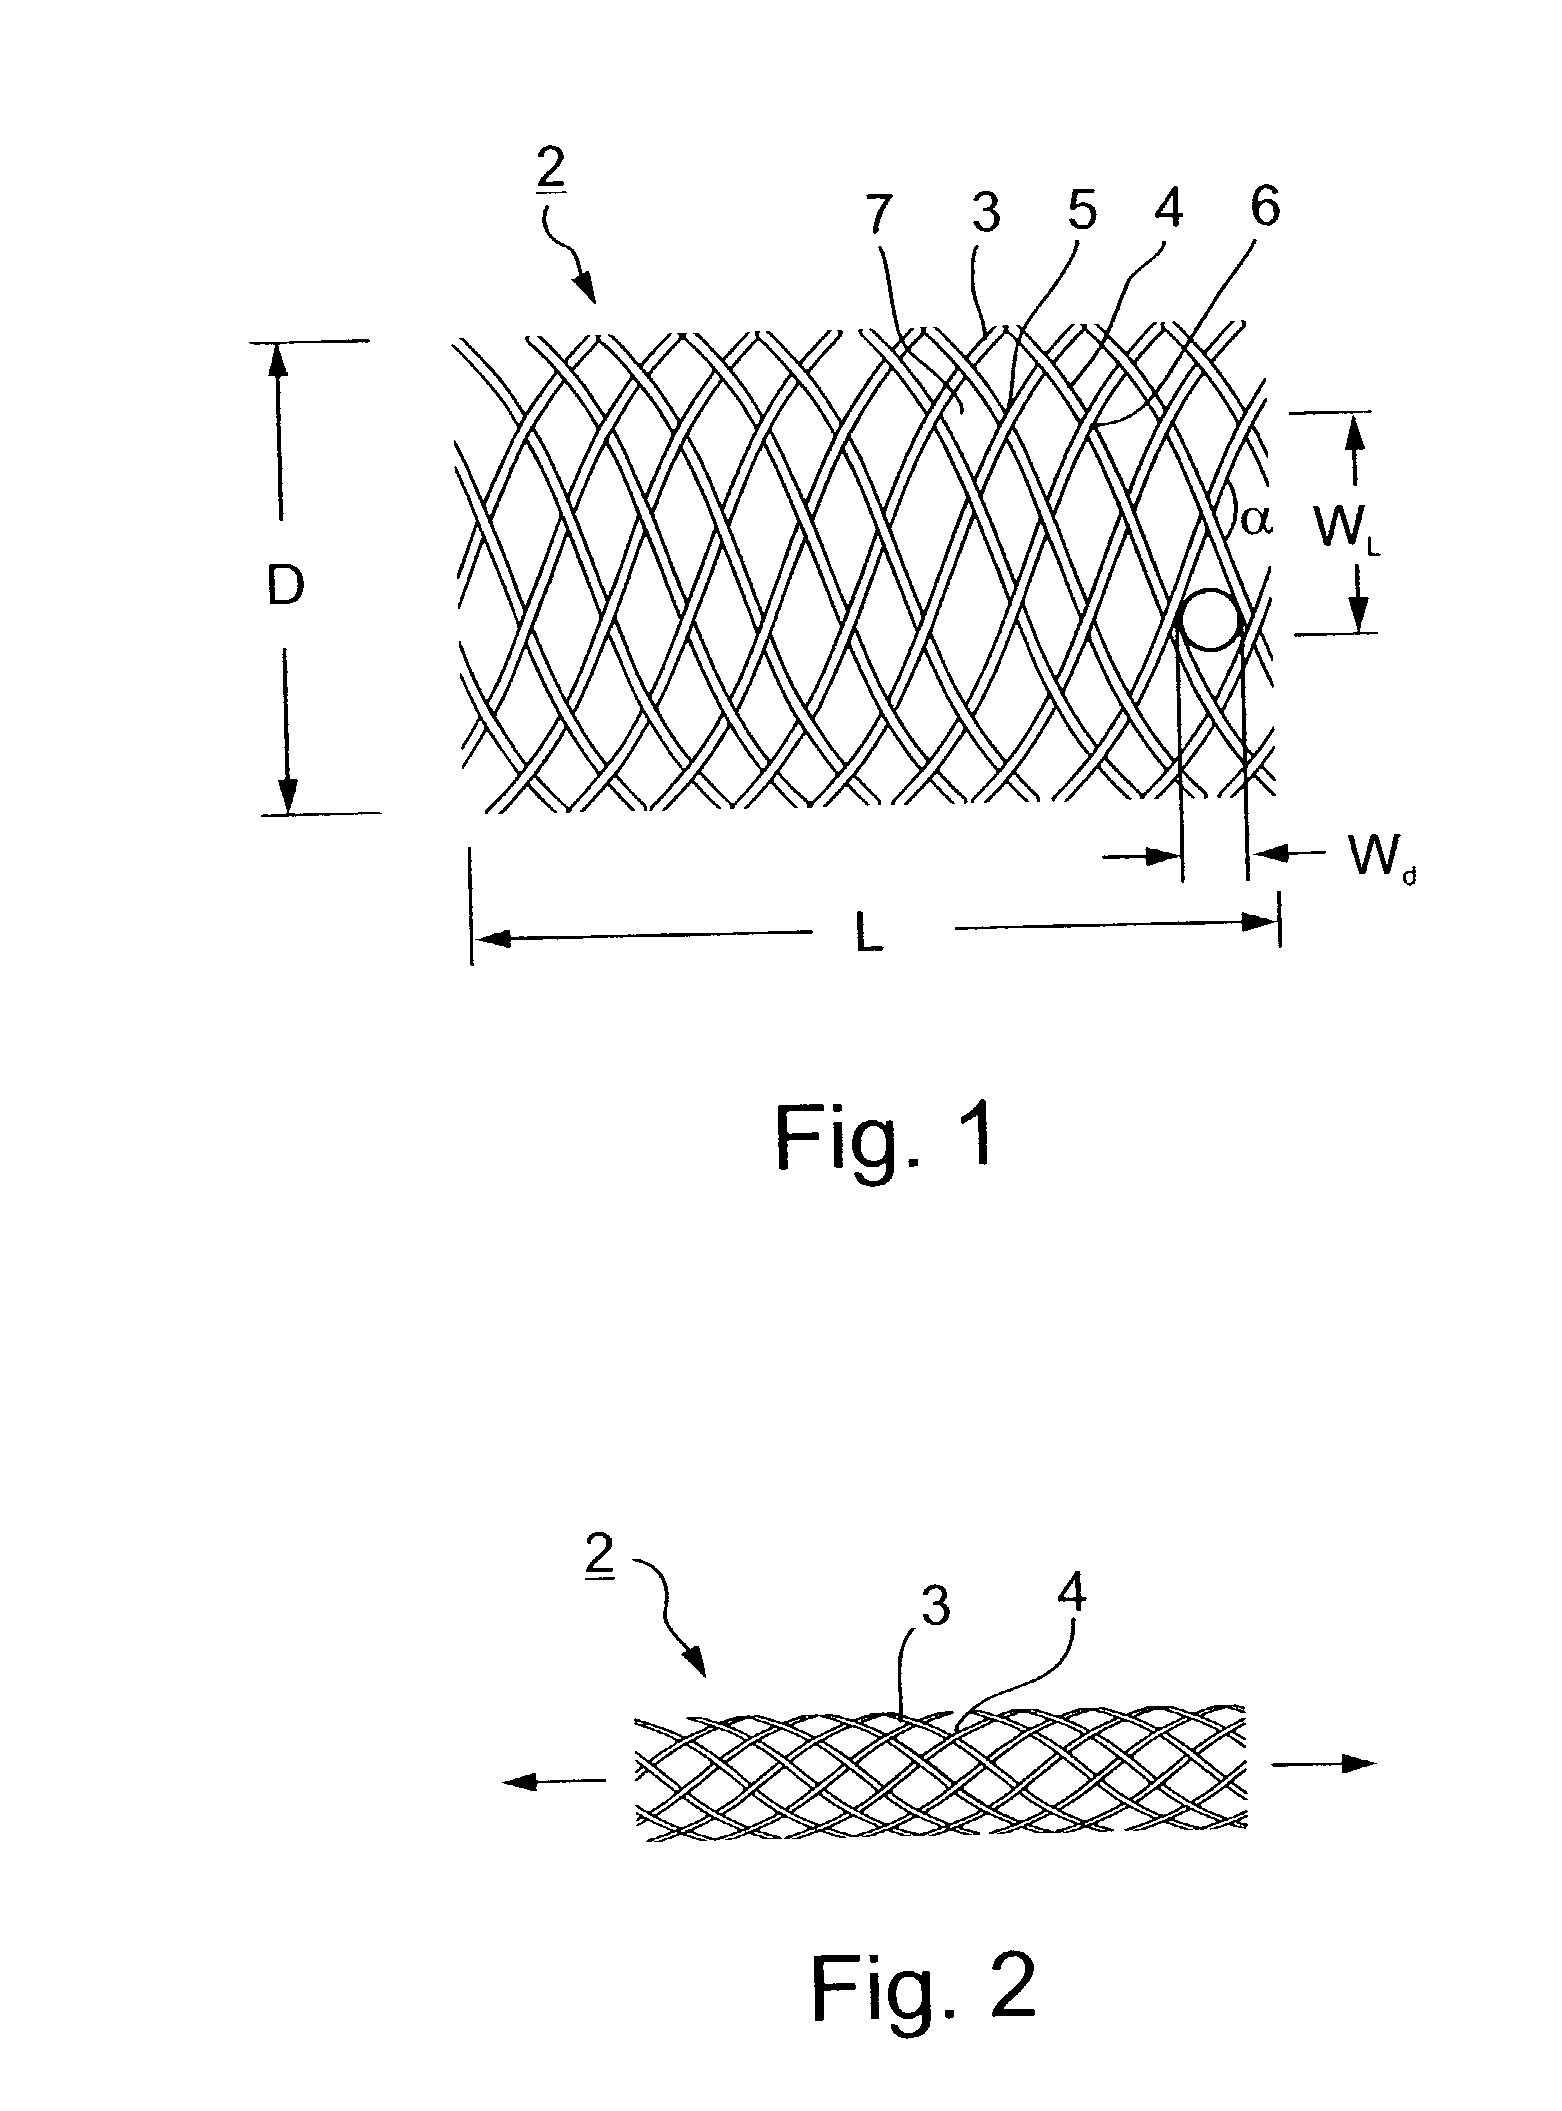 Implantable intraluminal protector device and method of using same for stabilizing atheromas